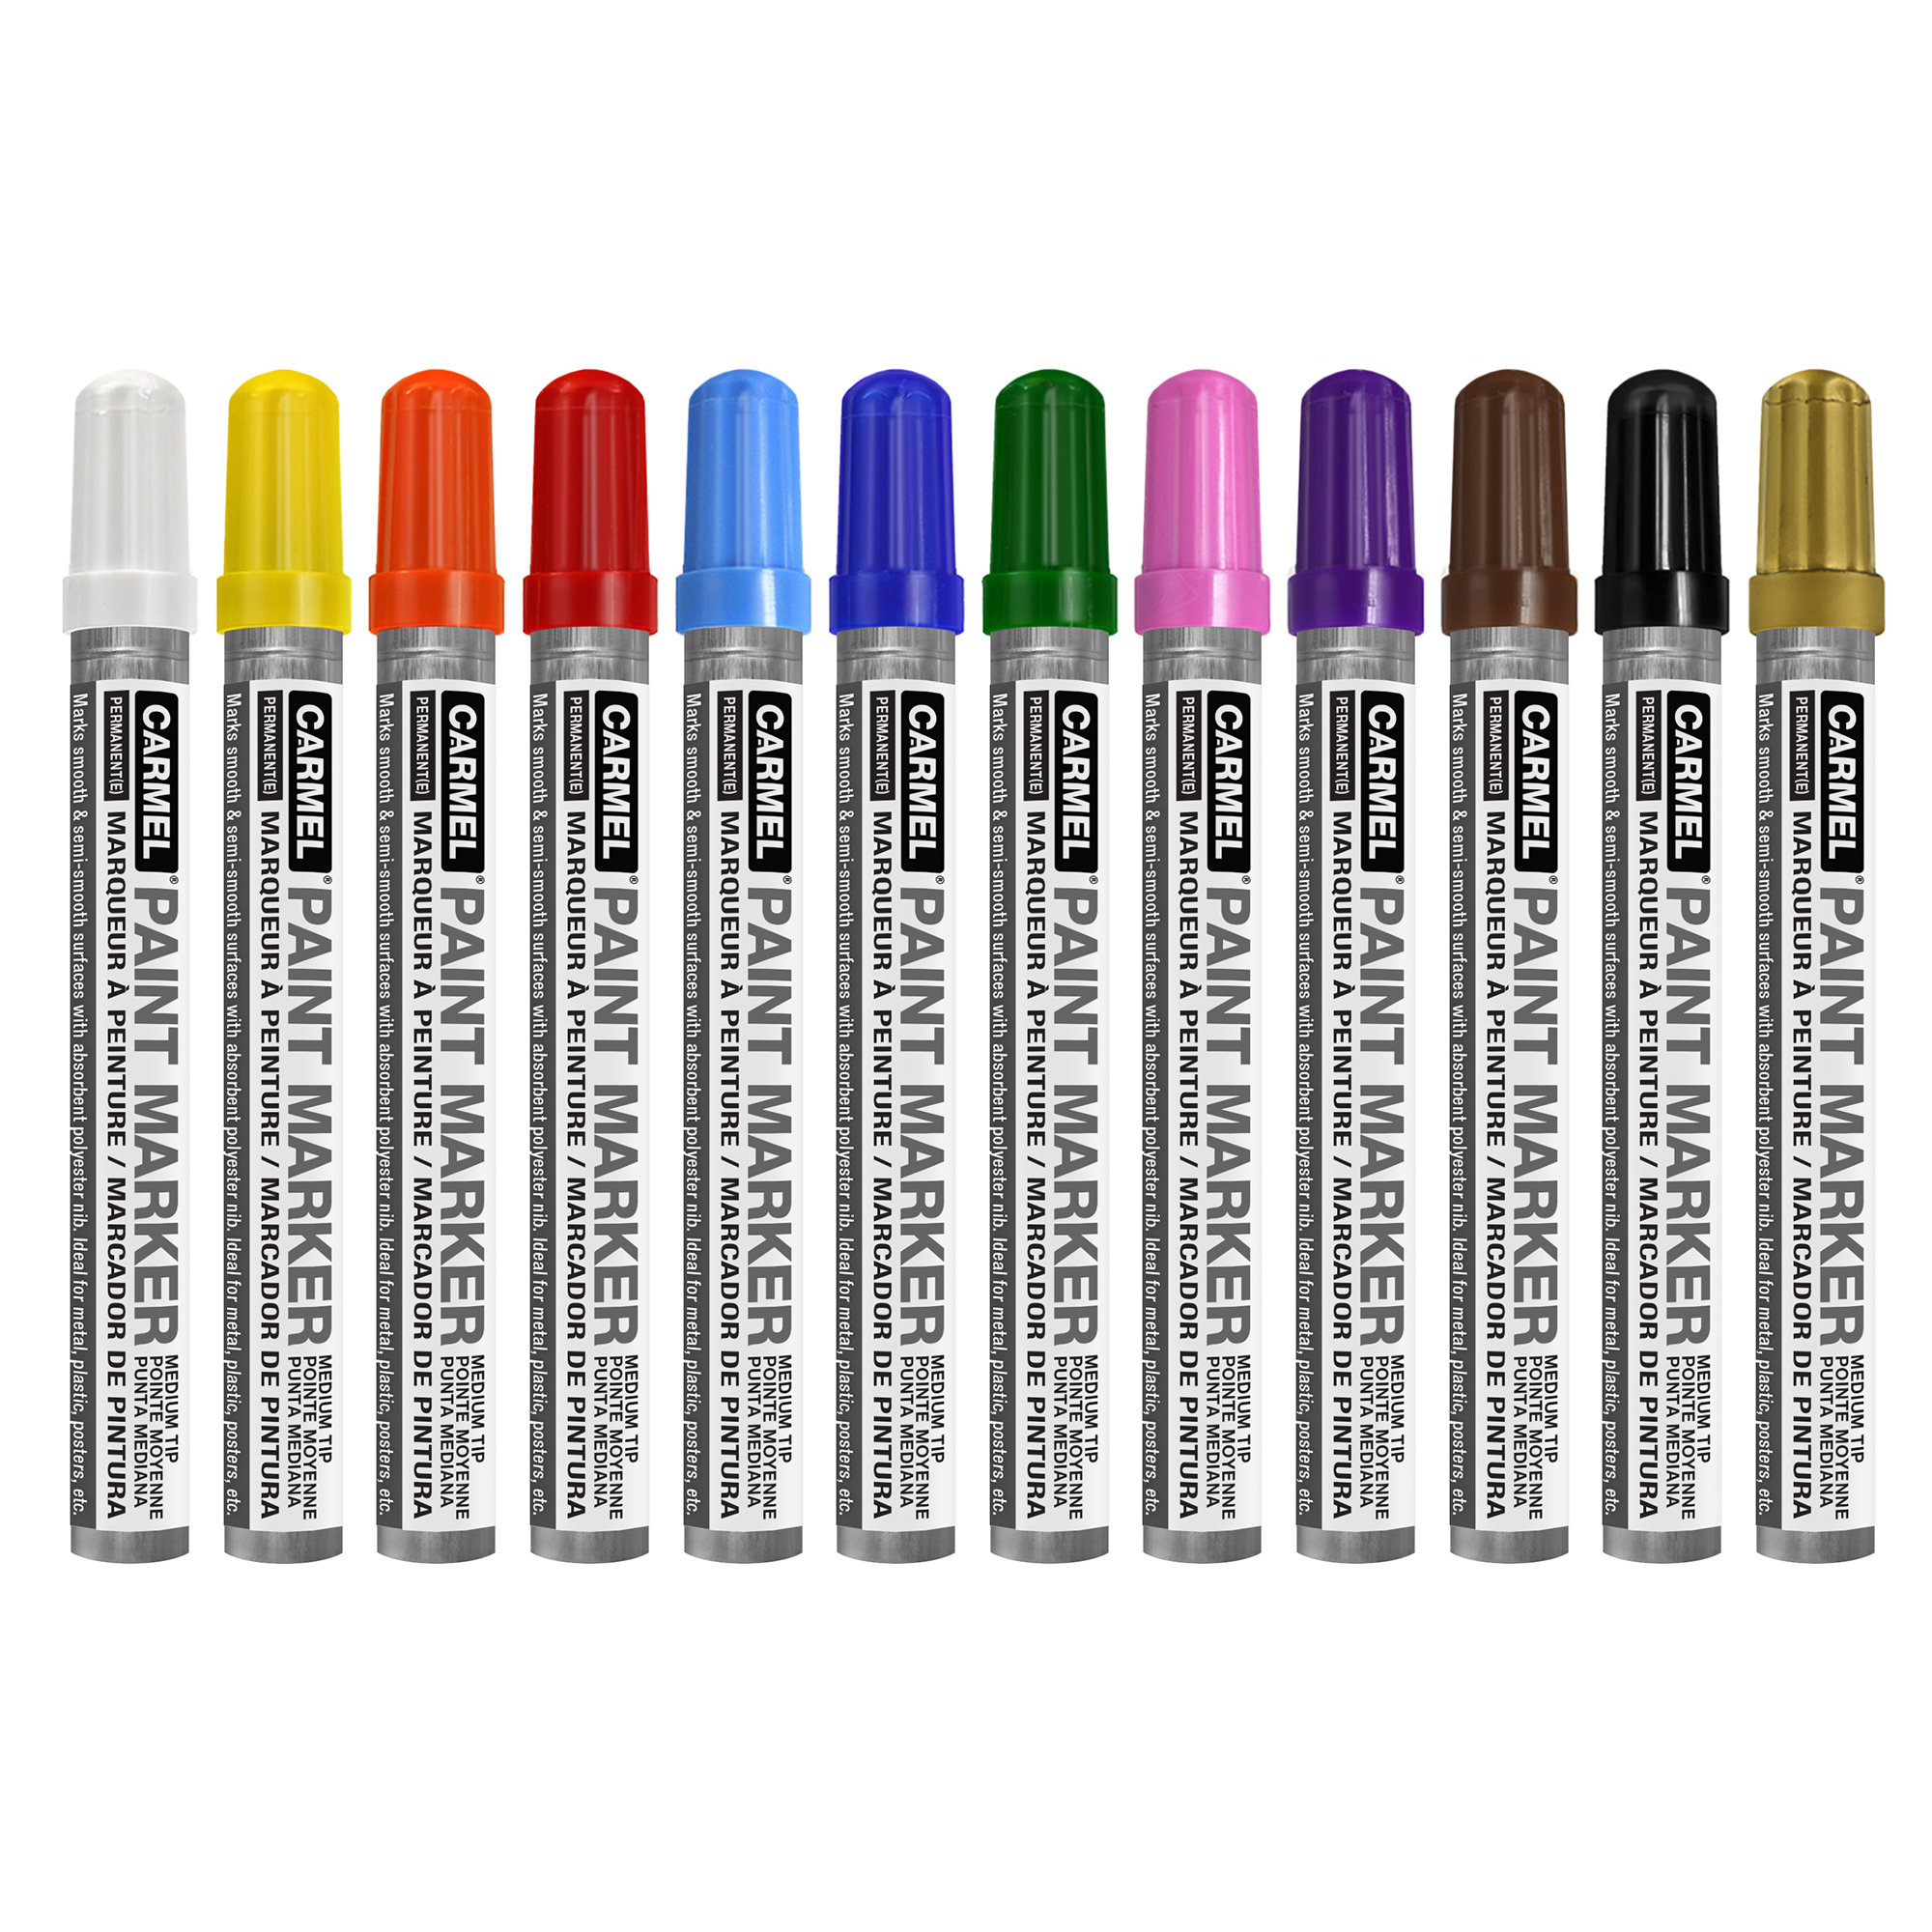 SHARPIE Oil-Based Paint Markers, Medium Point, Assorted Colors, 5 Count  (Packaging May Vary) - Great for Rock Painting